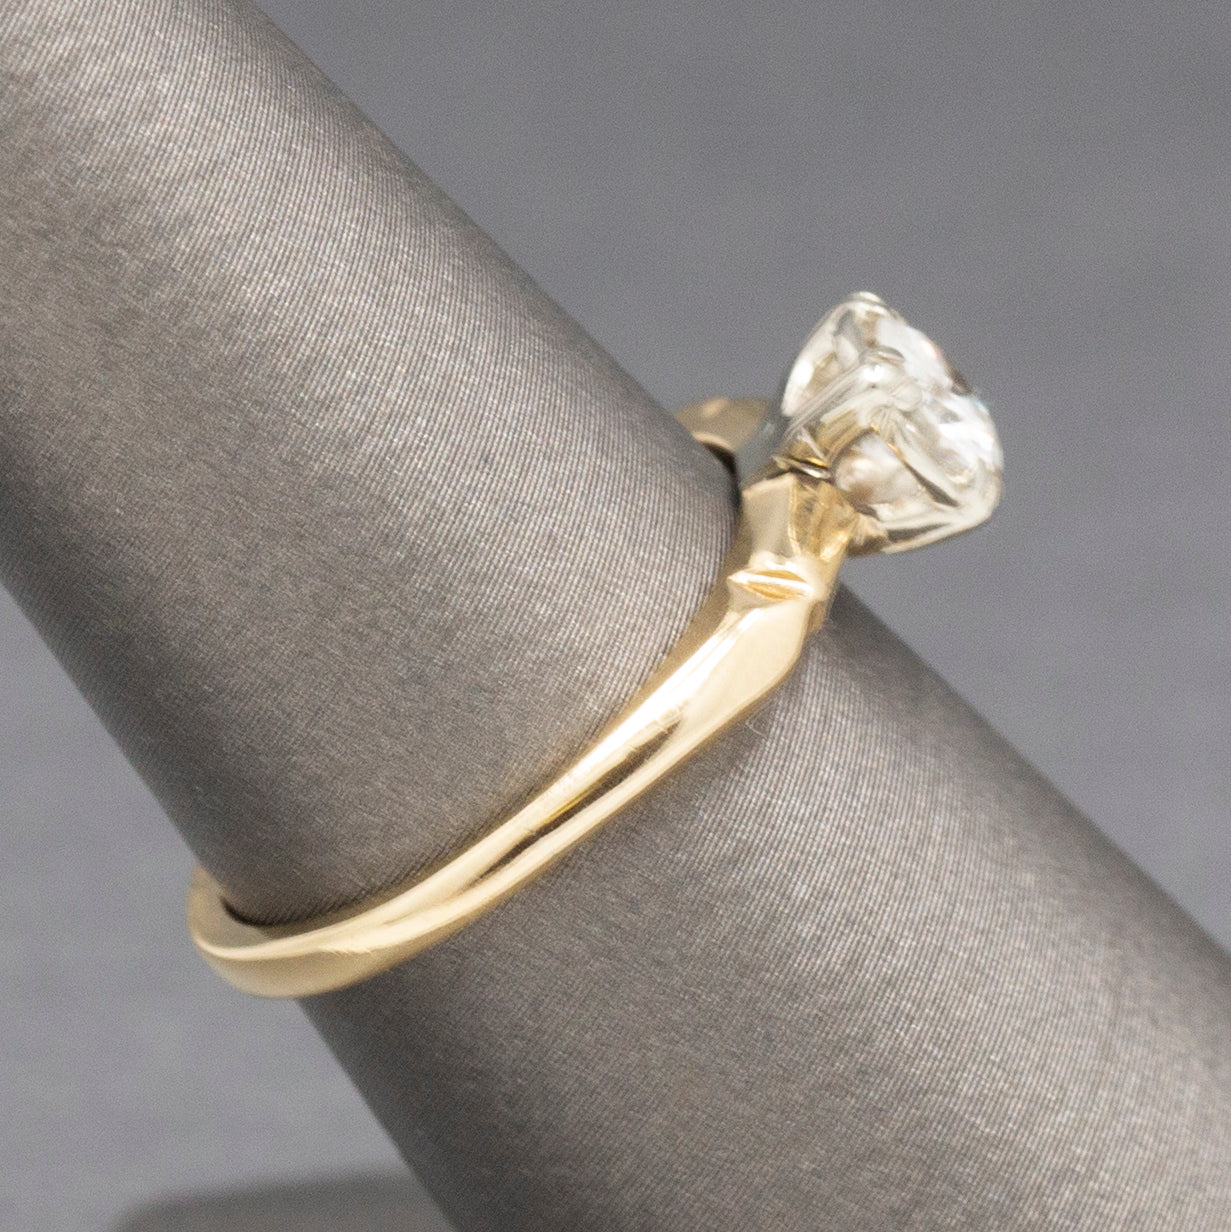 Classic 1940s Round Brilliant Cut Solitaire Diamond Ring in 14k Yellow Gold